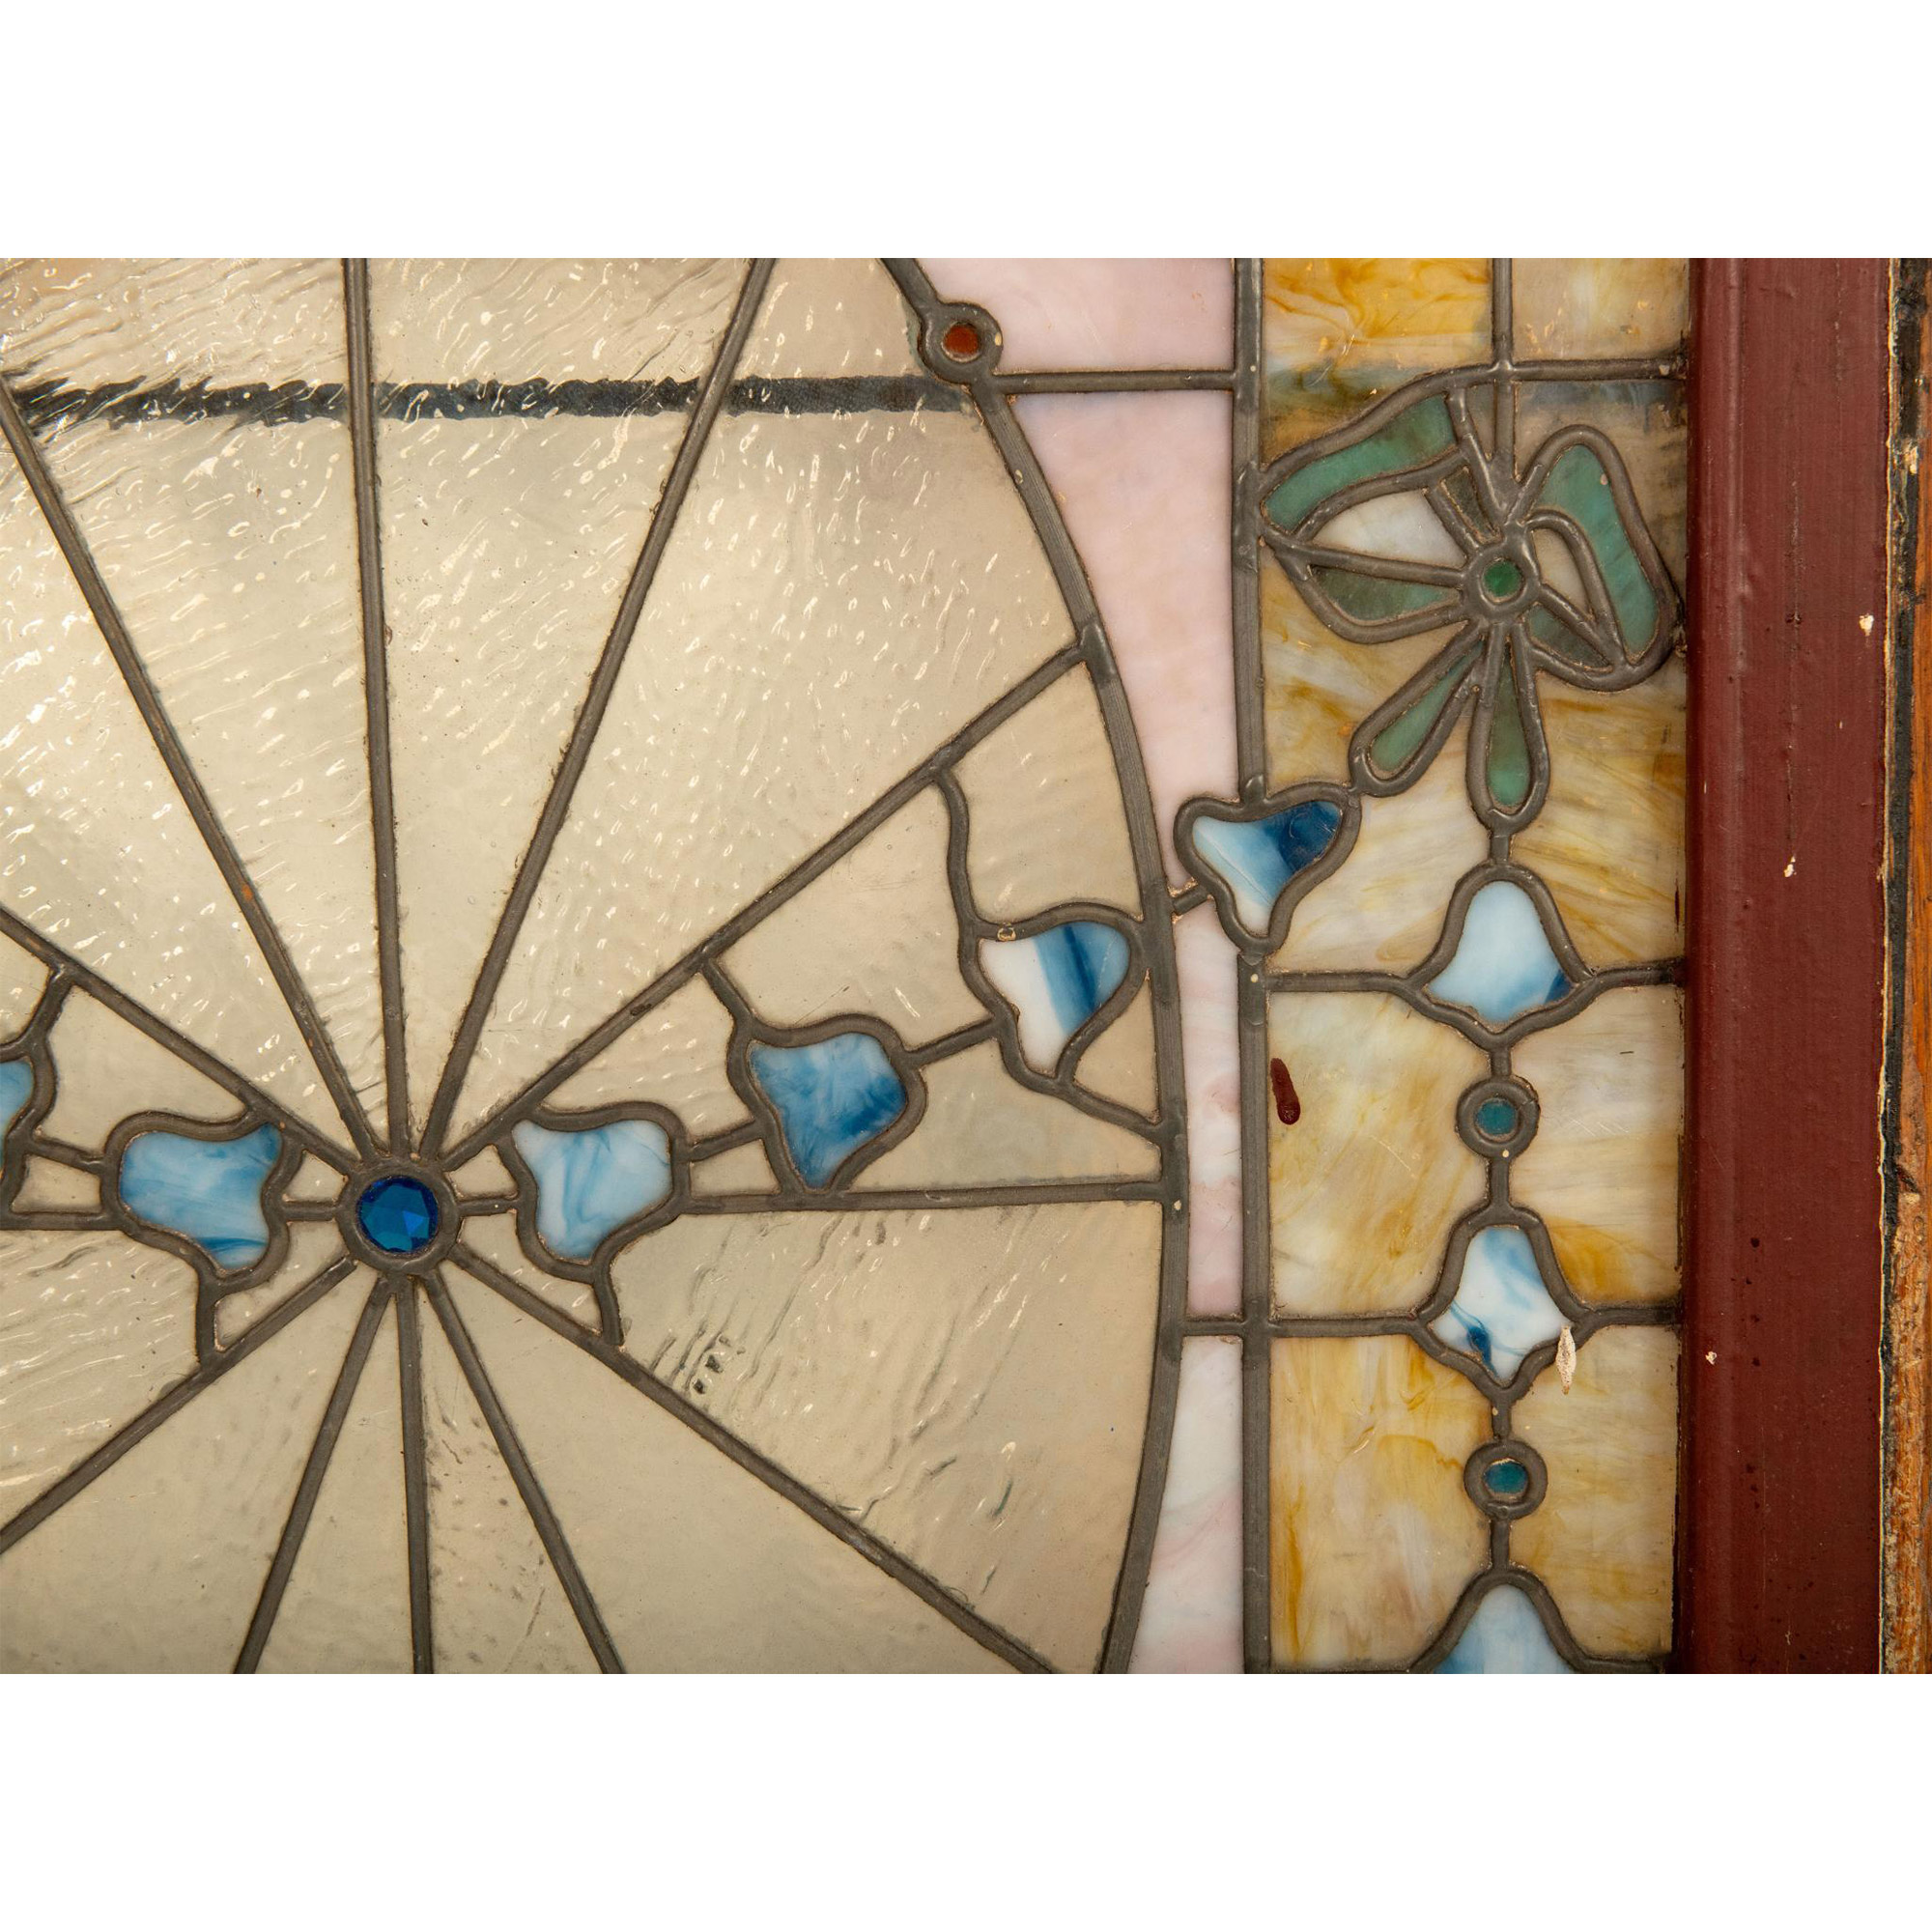 Antique Original Victorian Stained Glass Window Panel - Image 6 of 6